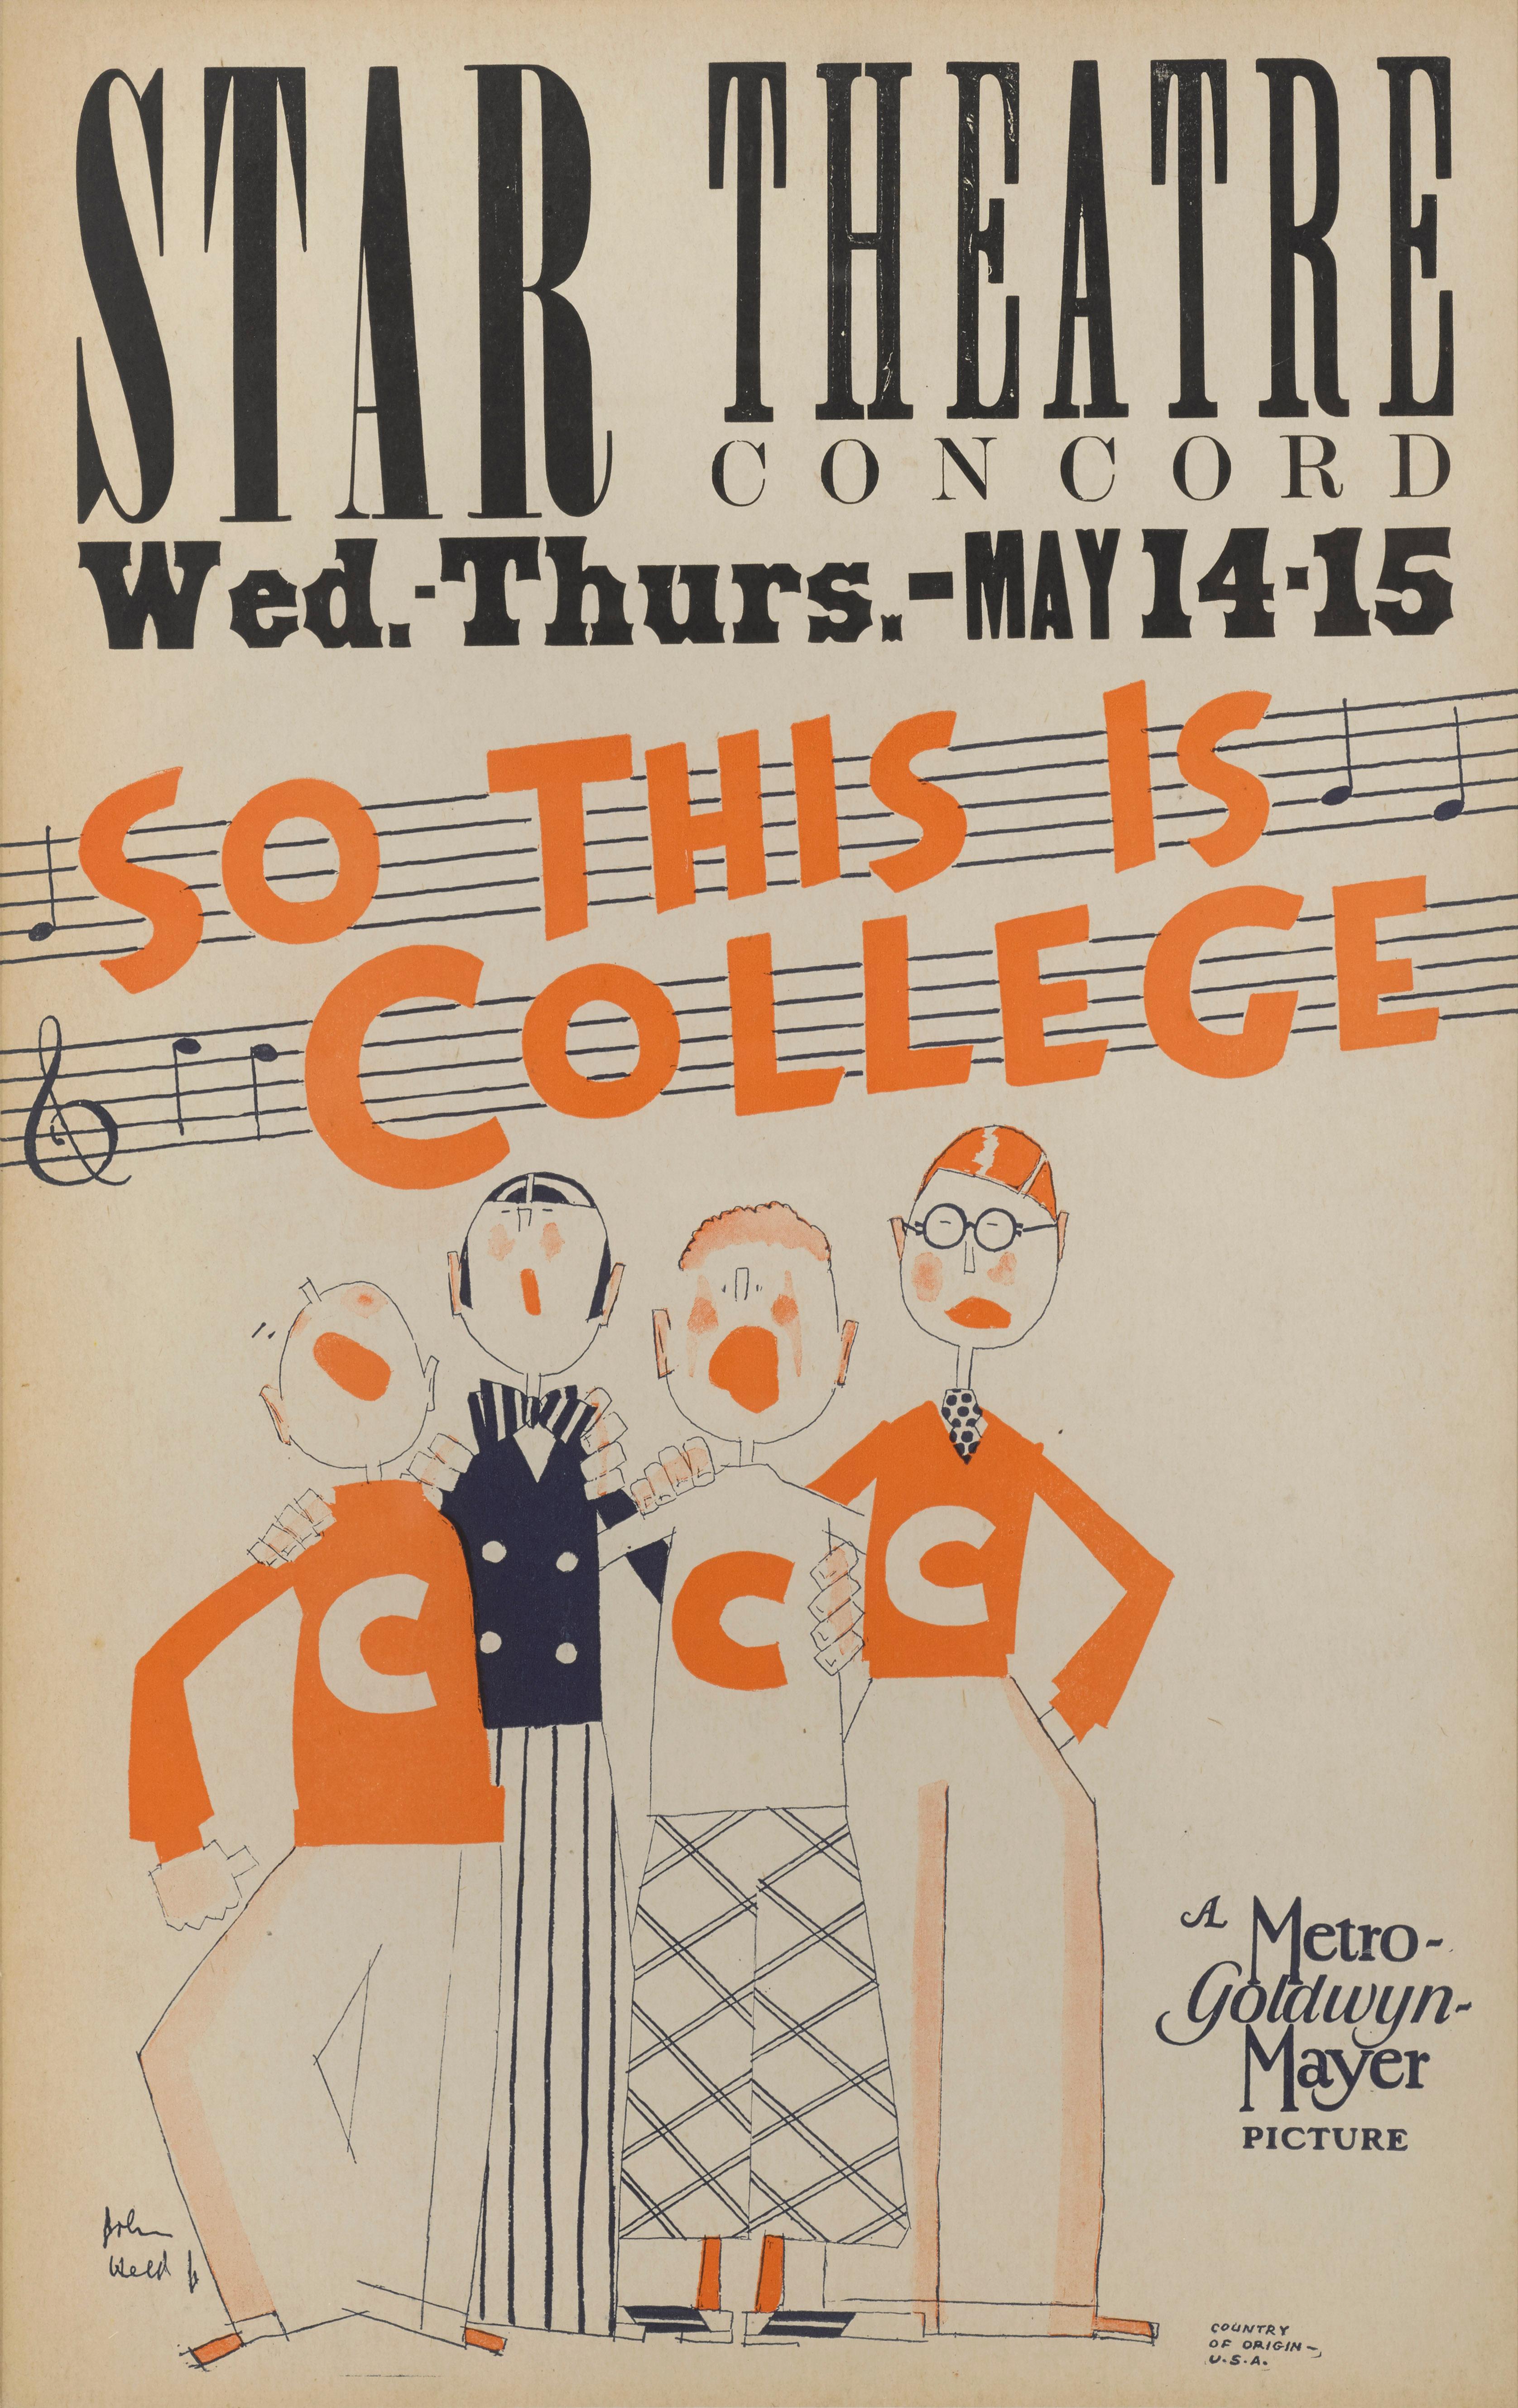 Original Framed US film poster for ‘So This Is College” the 1929 comedy musical staring Elliott Nugent, Robert Montgomery and directed by Sam Wood. The fabulous art work is by John Held Jr. (1889-1958) the American cartoonist and illustrator. This